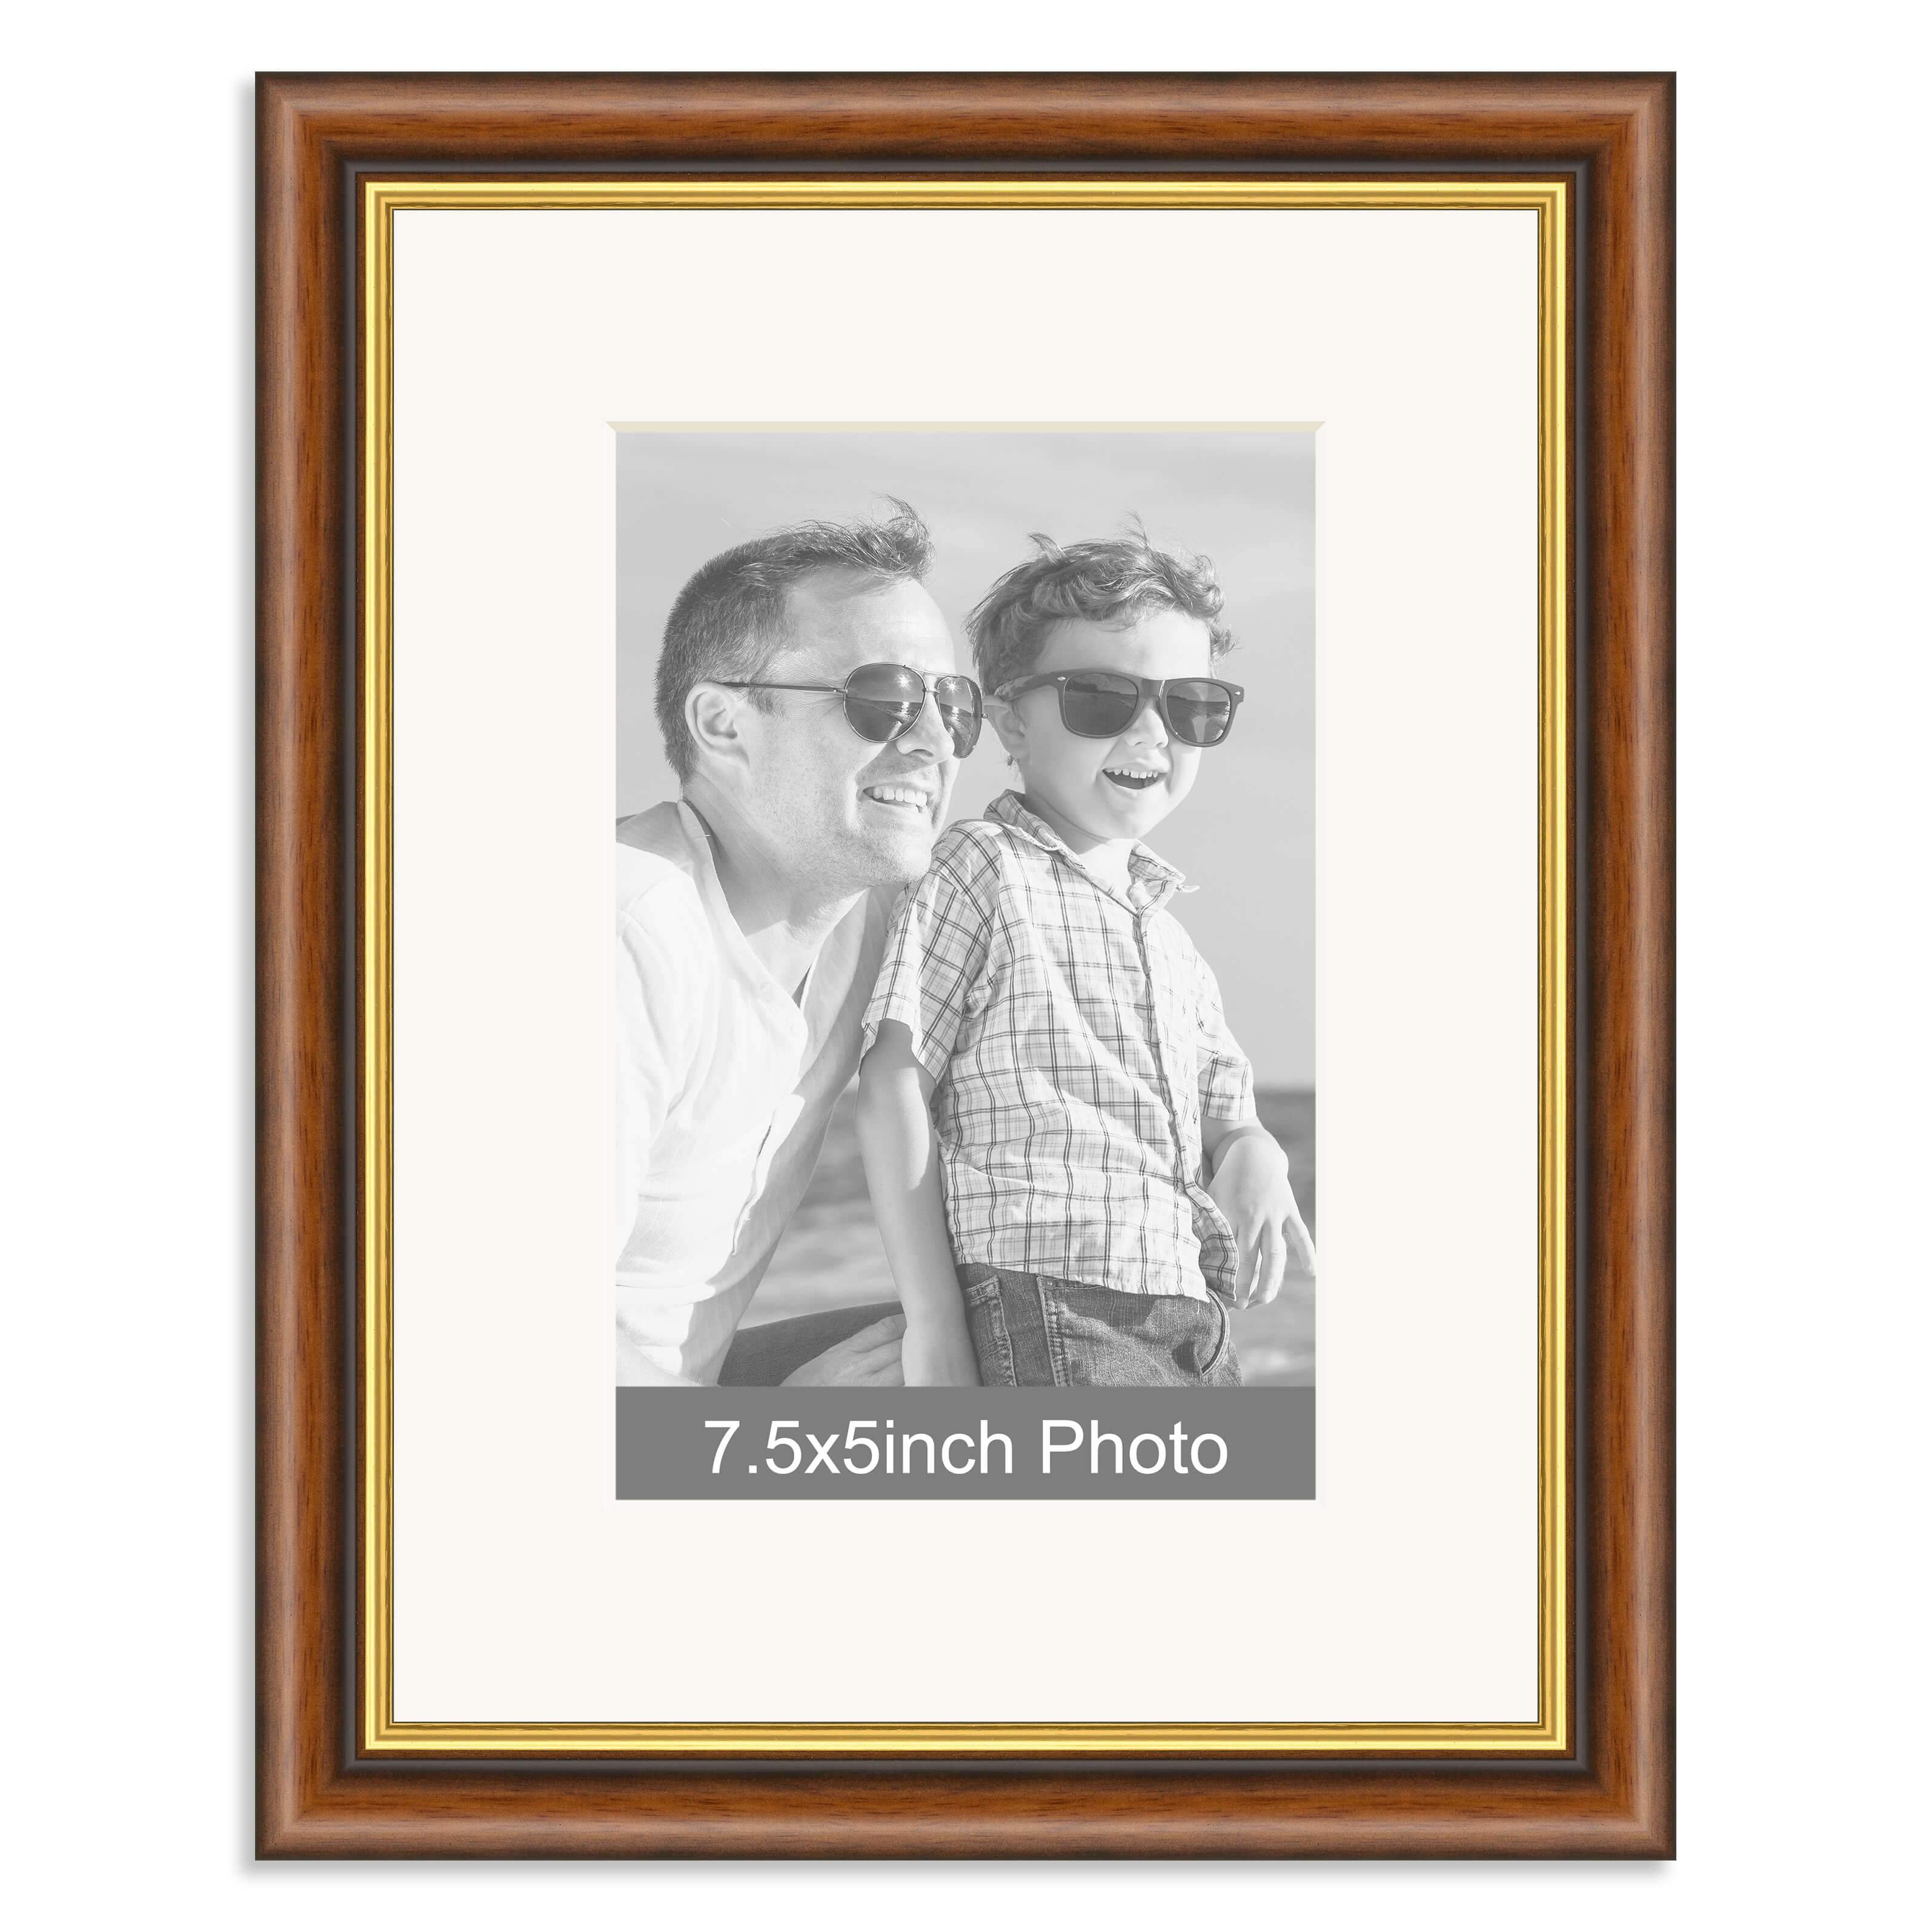 Mahogany & Gold Wooden Photo Frame with mount for a 7.5×5/5×7.5in Photo